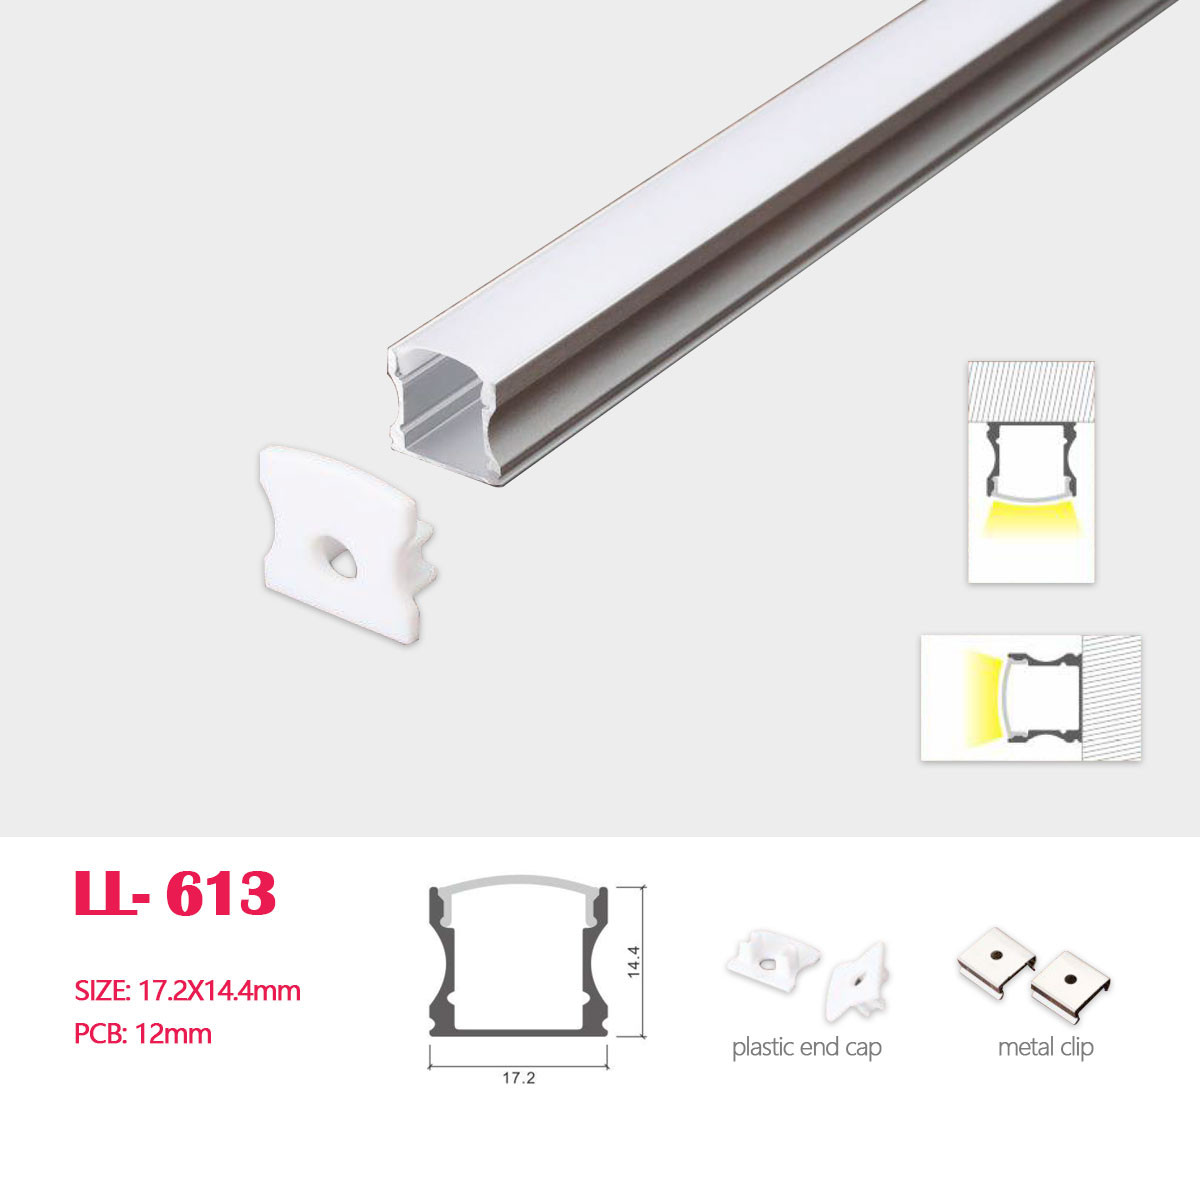 1M(3.28FT) 17.2MM*14.4MM Surface Mounted Or Wall Mounted LED Aluminum Profile with Cover and End Caps and Mounting Clips for LED Rigid Strip Lighting System